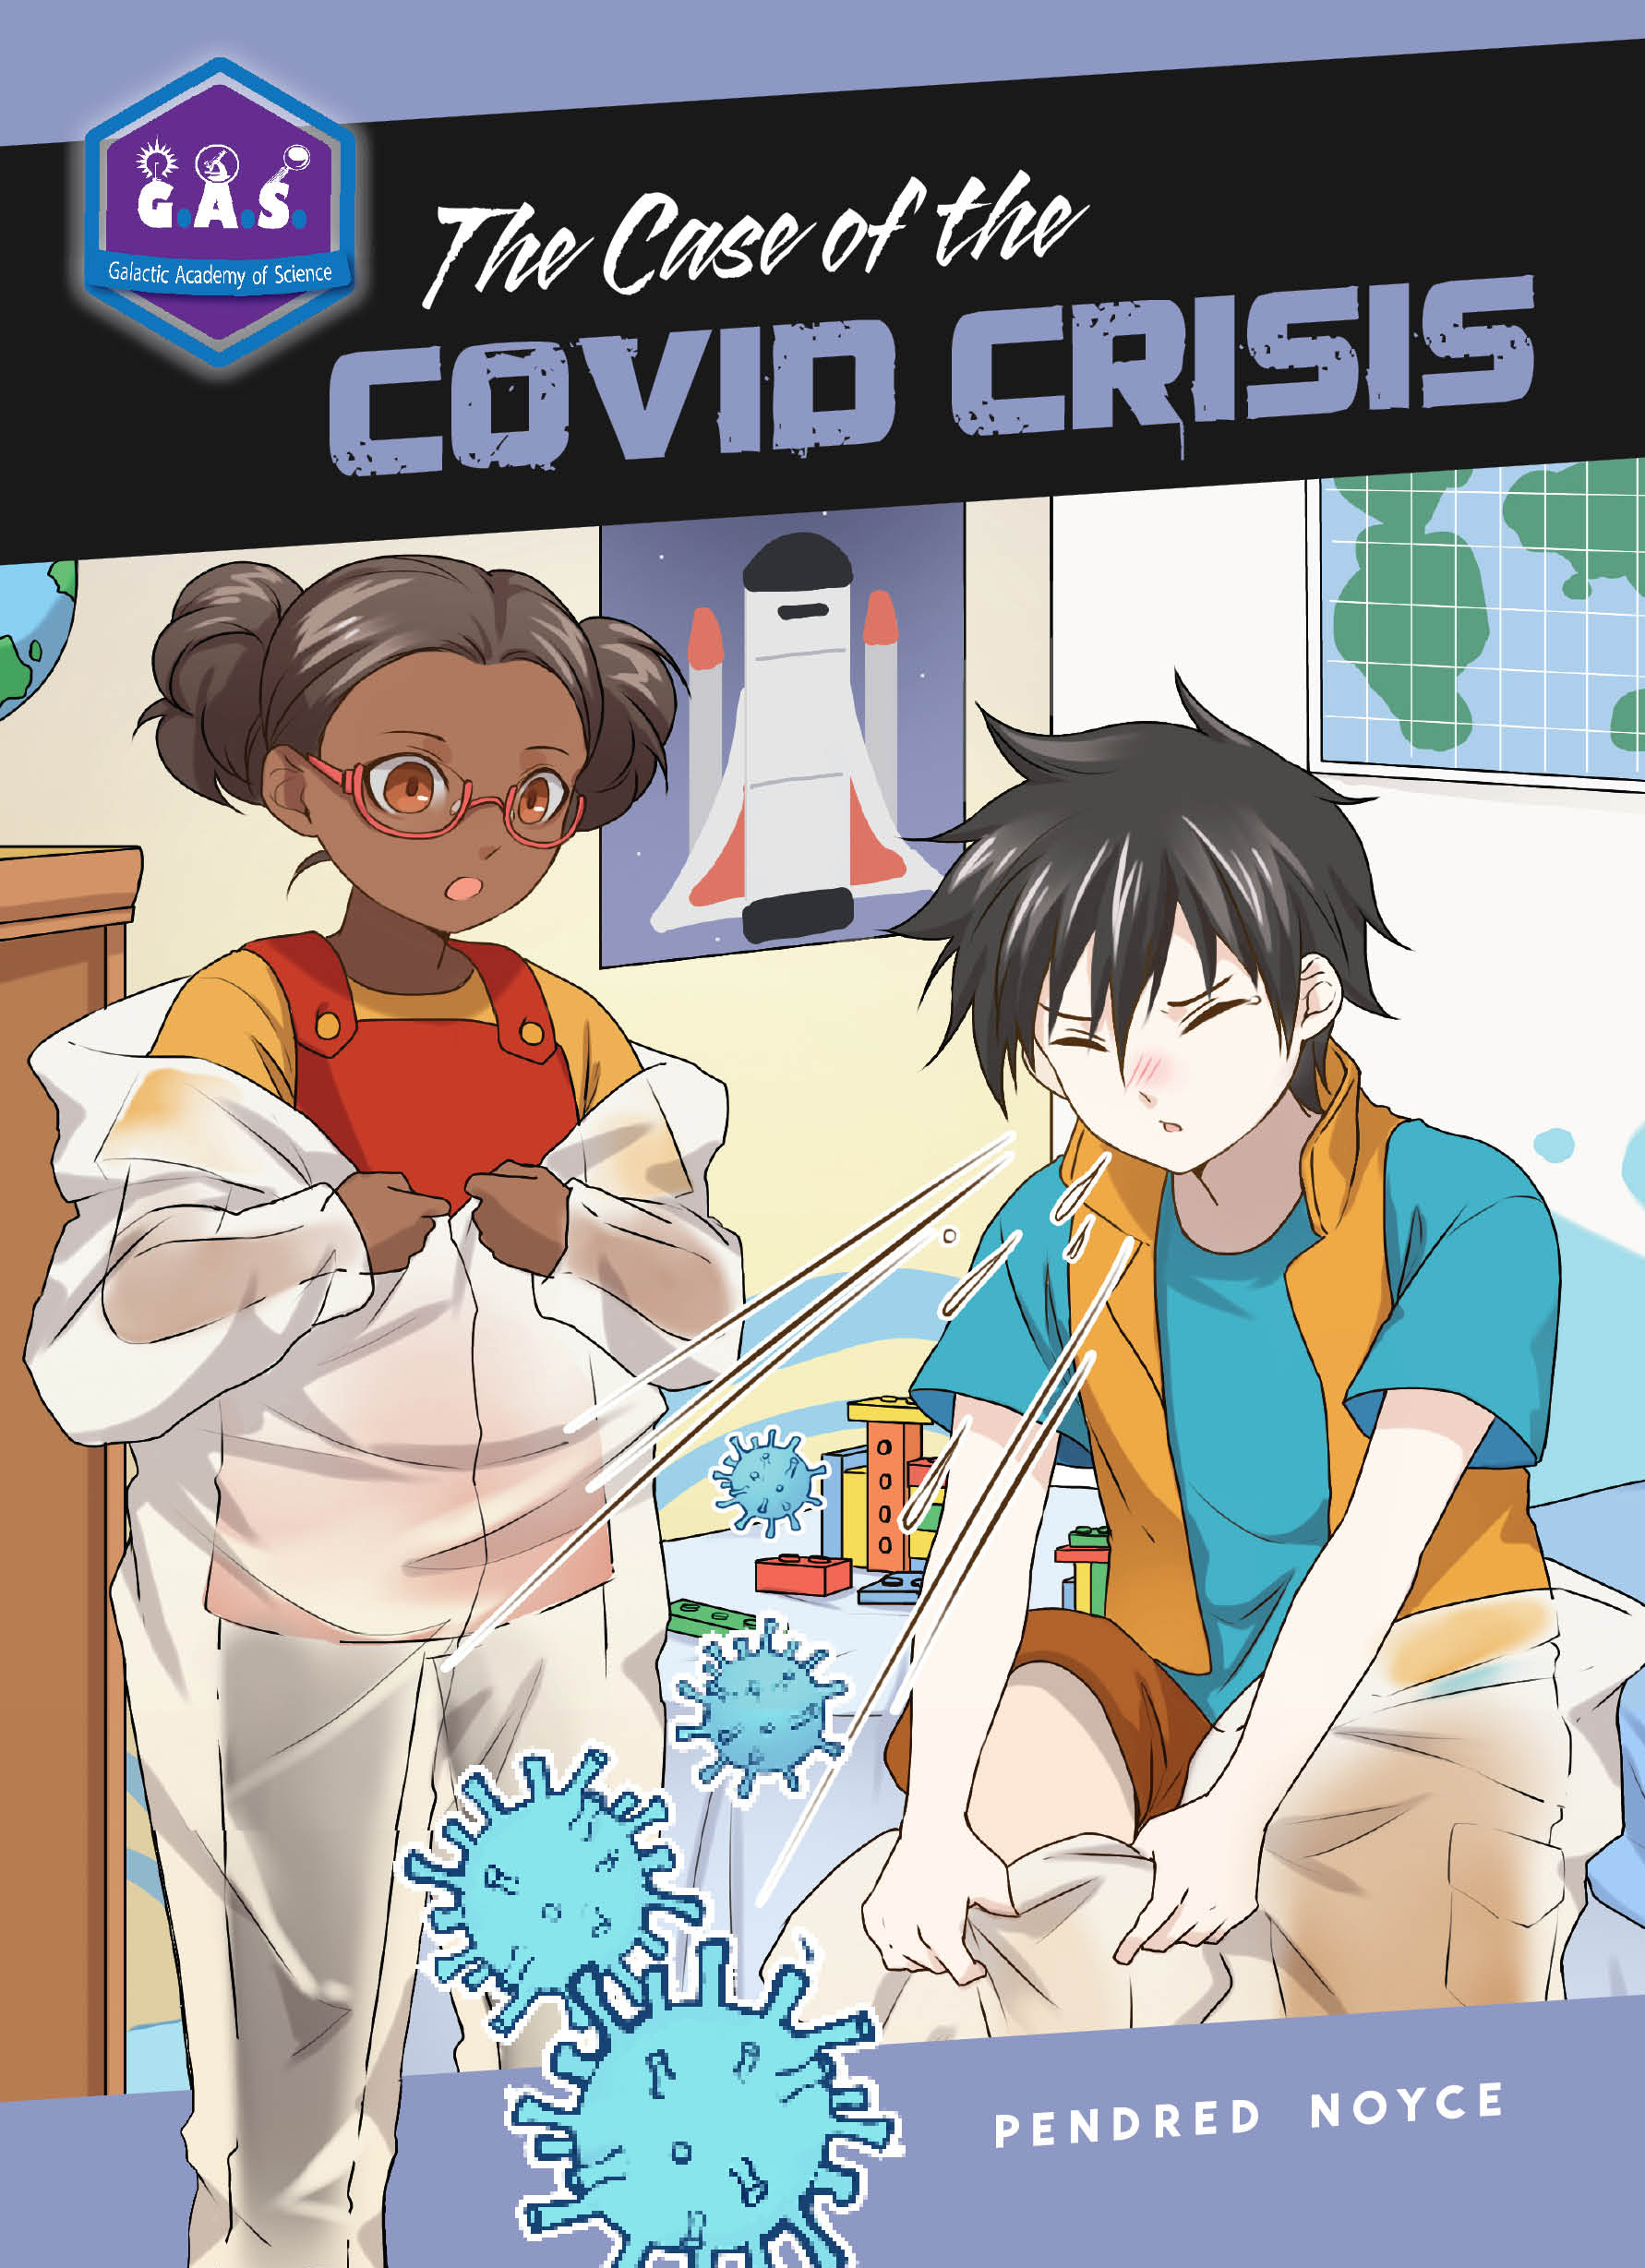 The Case of the Covid Crisis book cover